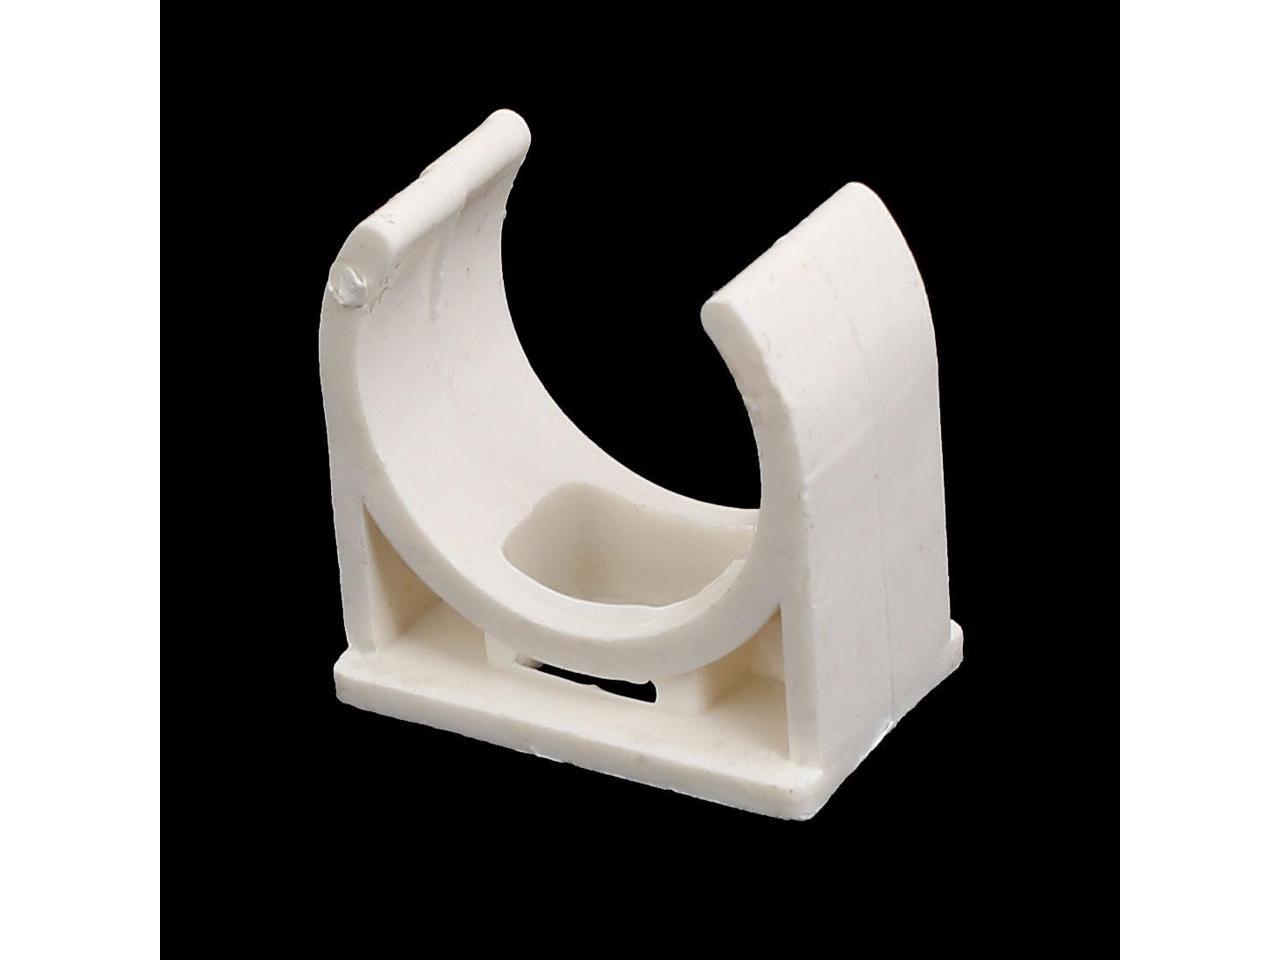 20mm Dia PVC U Shaped Pipe Fitting Clamps Clips Water Tube Holder White ...